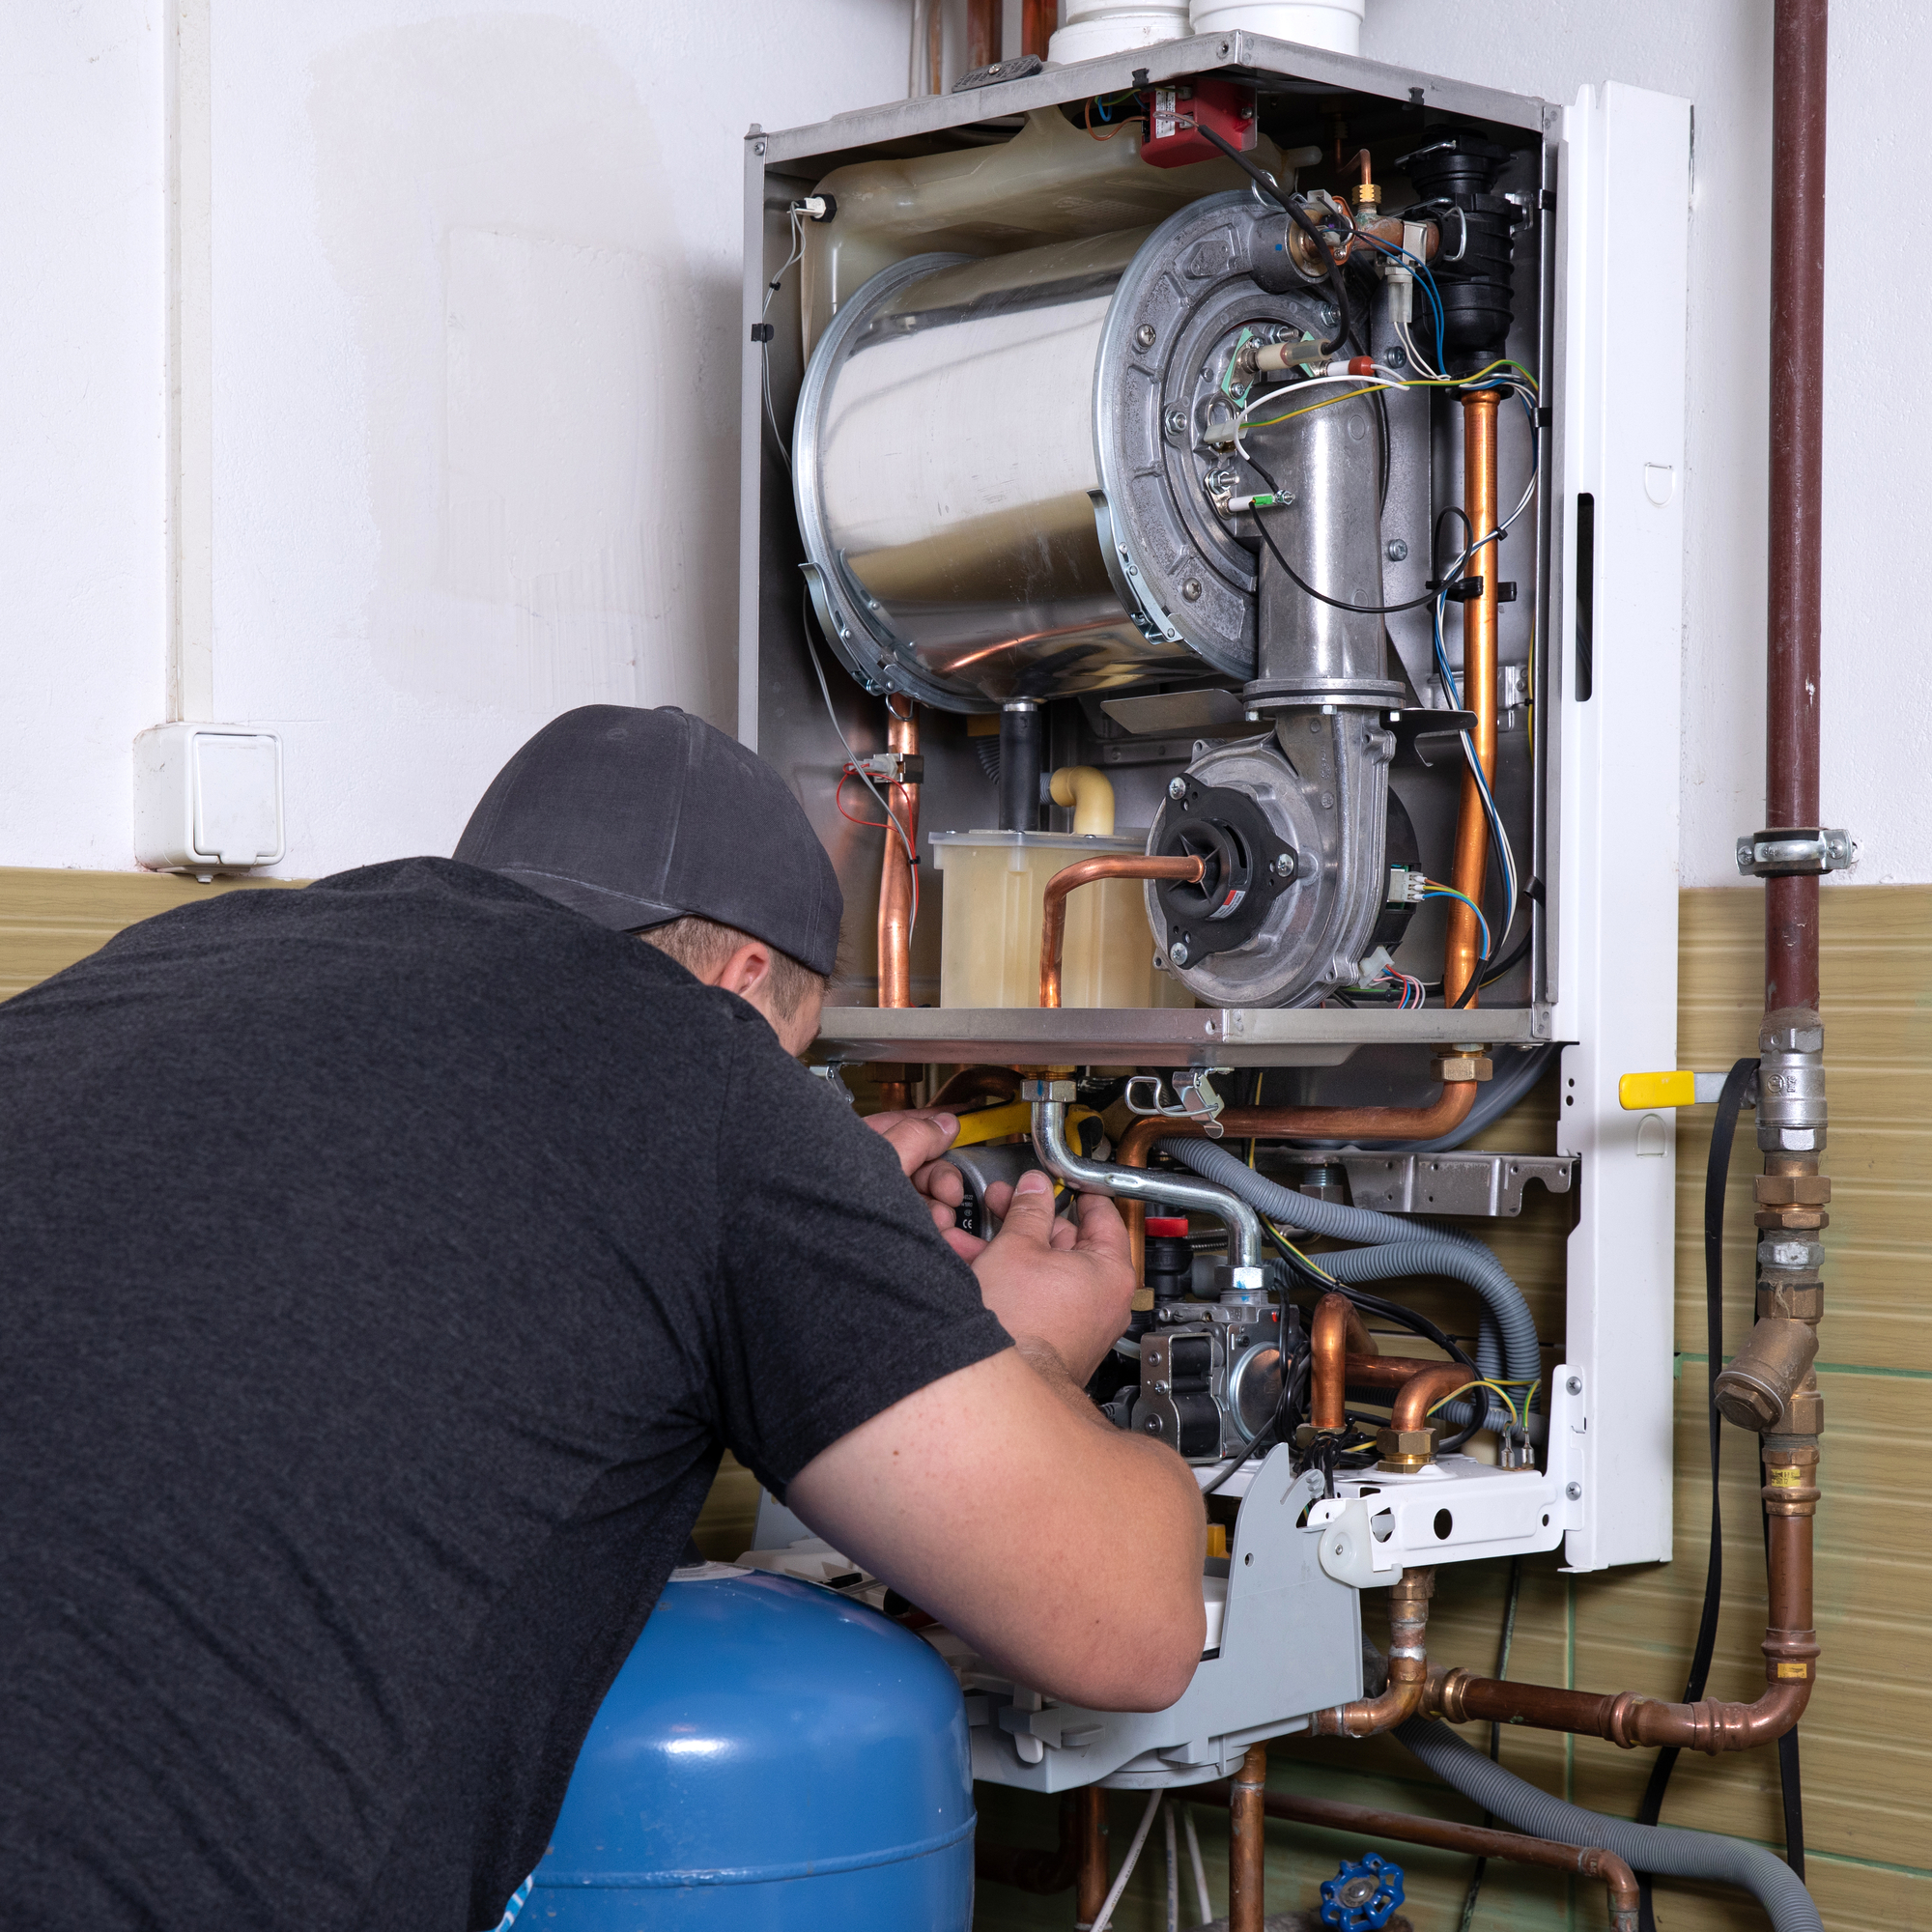 Master of gas service, adjusts the combustion gas on the gas boiler